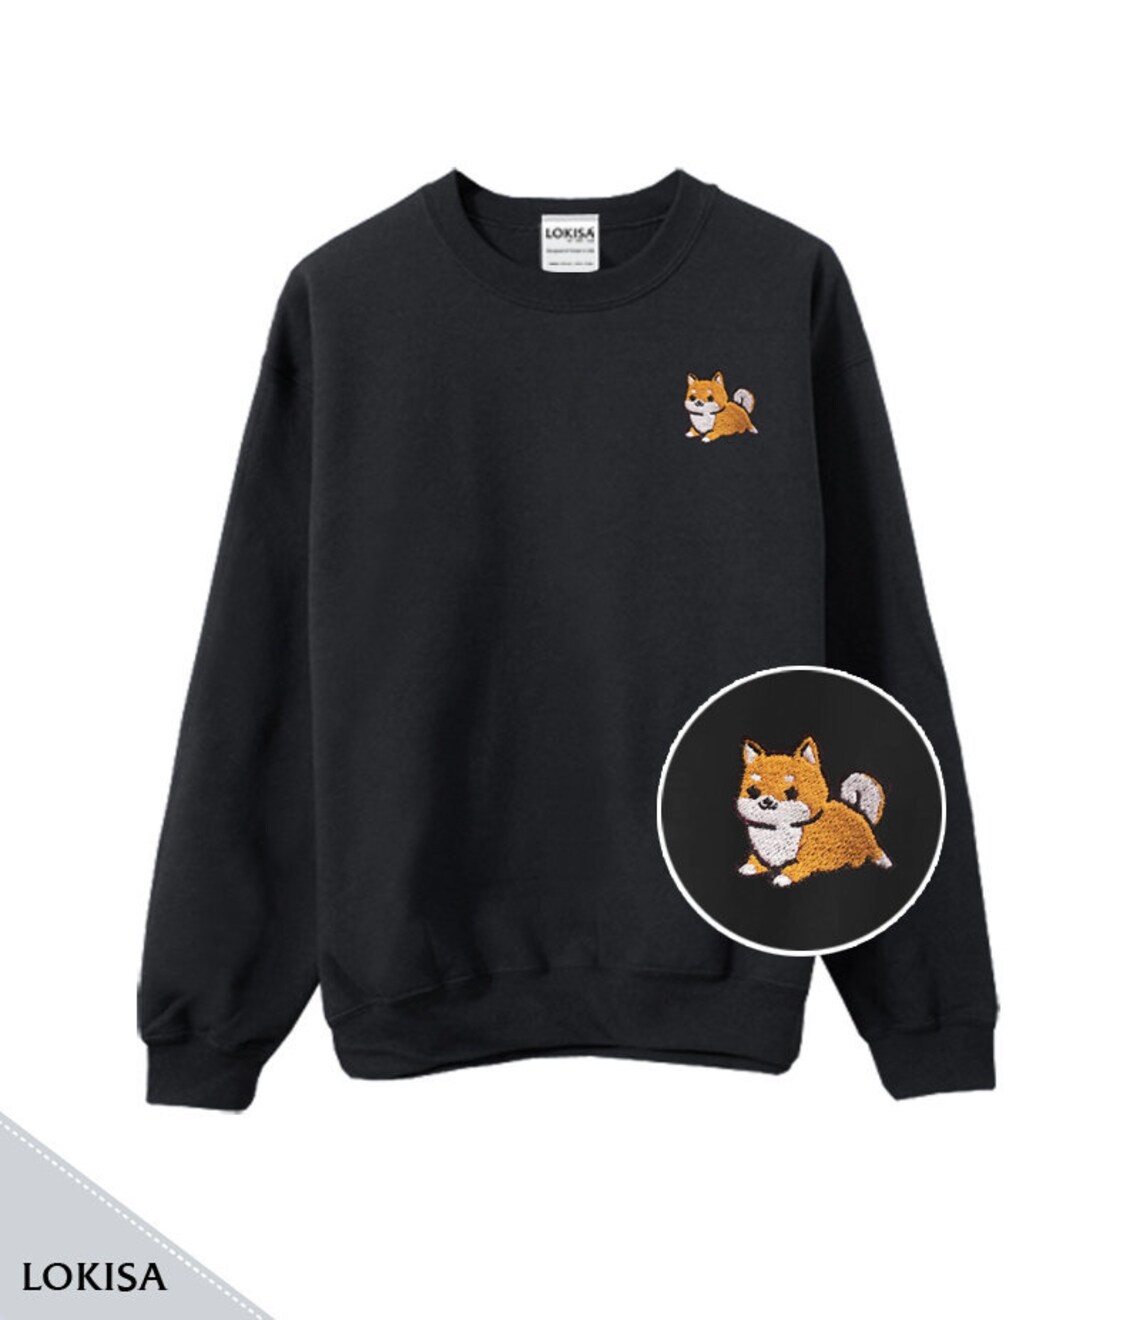 Chubby Tubby Red Shiba Inu Embroidered Sweater Sweatshirt - Etsy